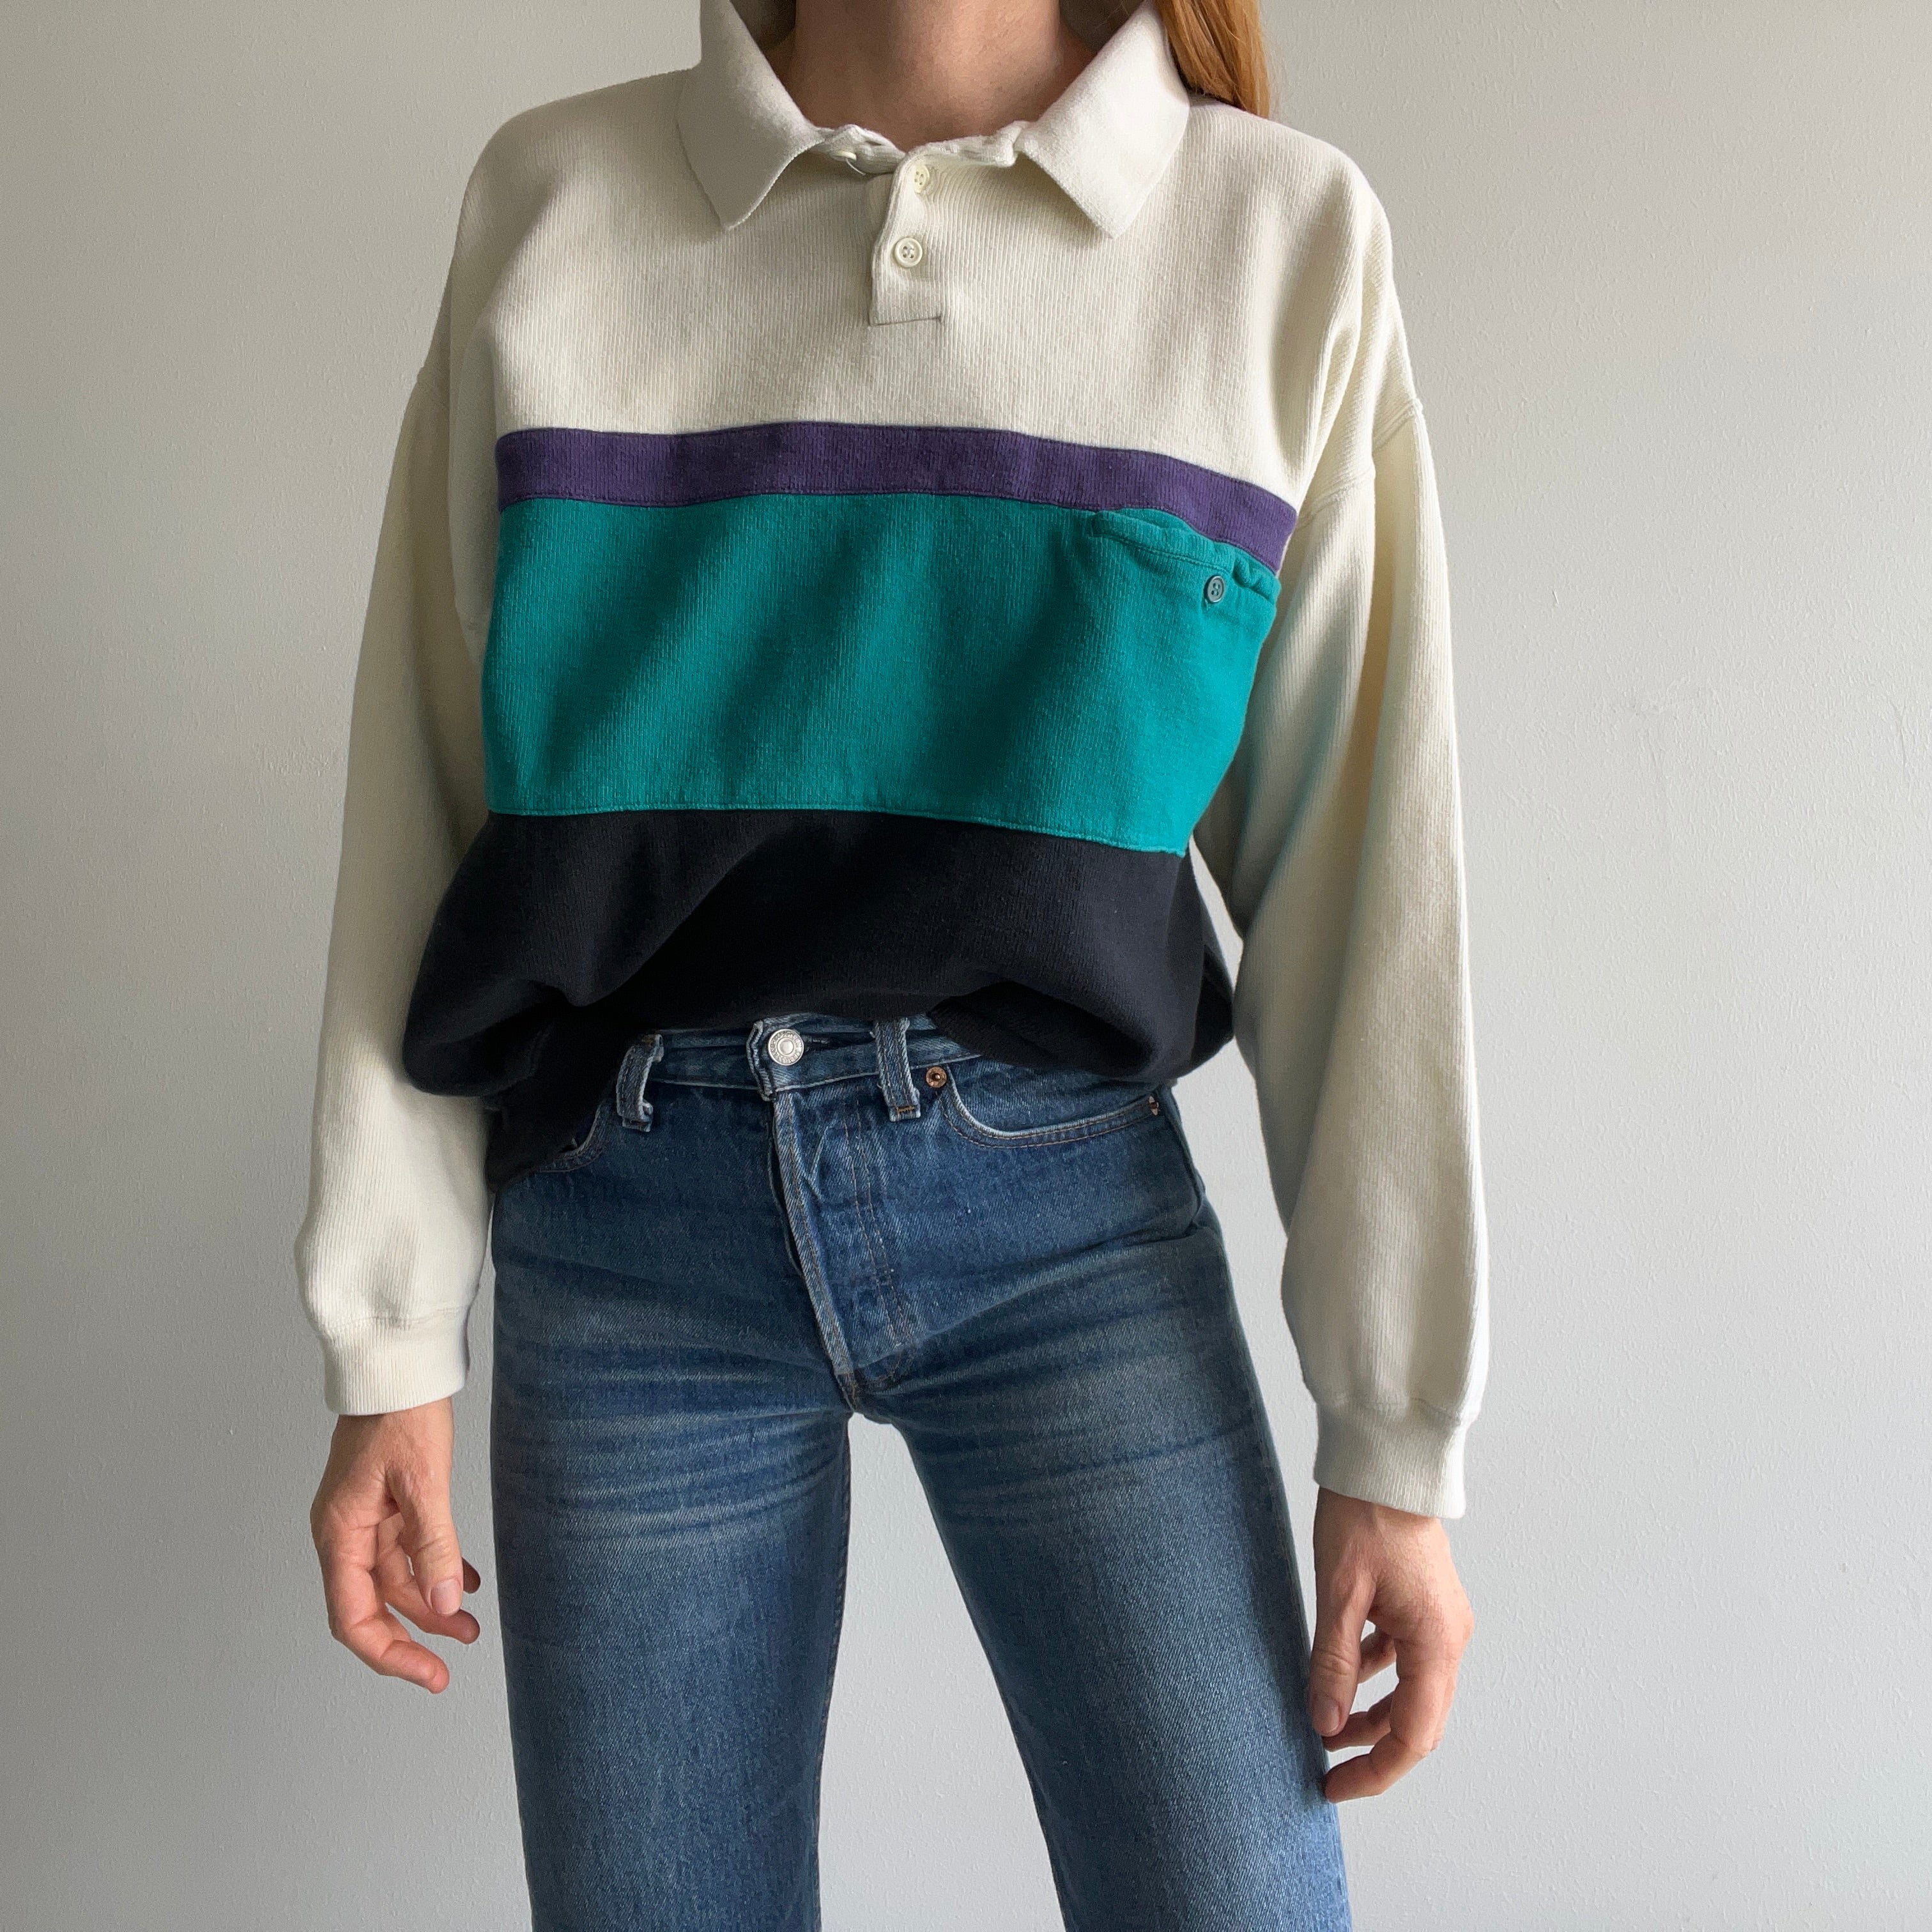 1990s !!!!!!!!!! Cotton Knit Collared Color Block Sweater/Sweatshirt